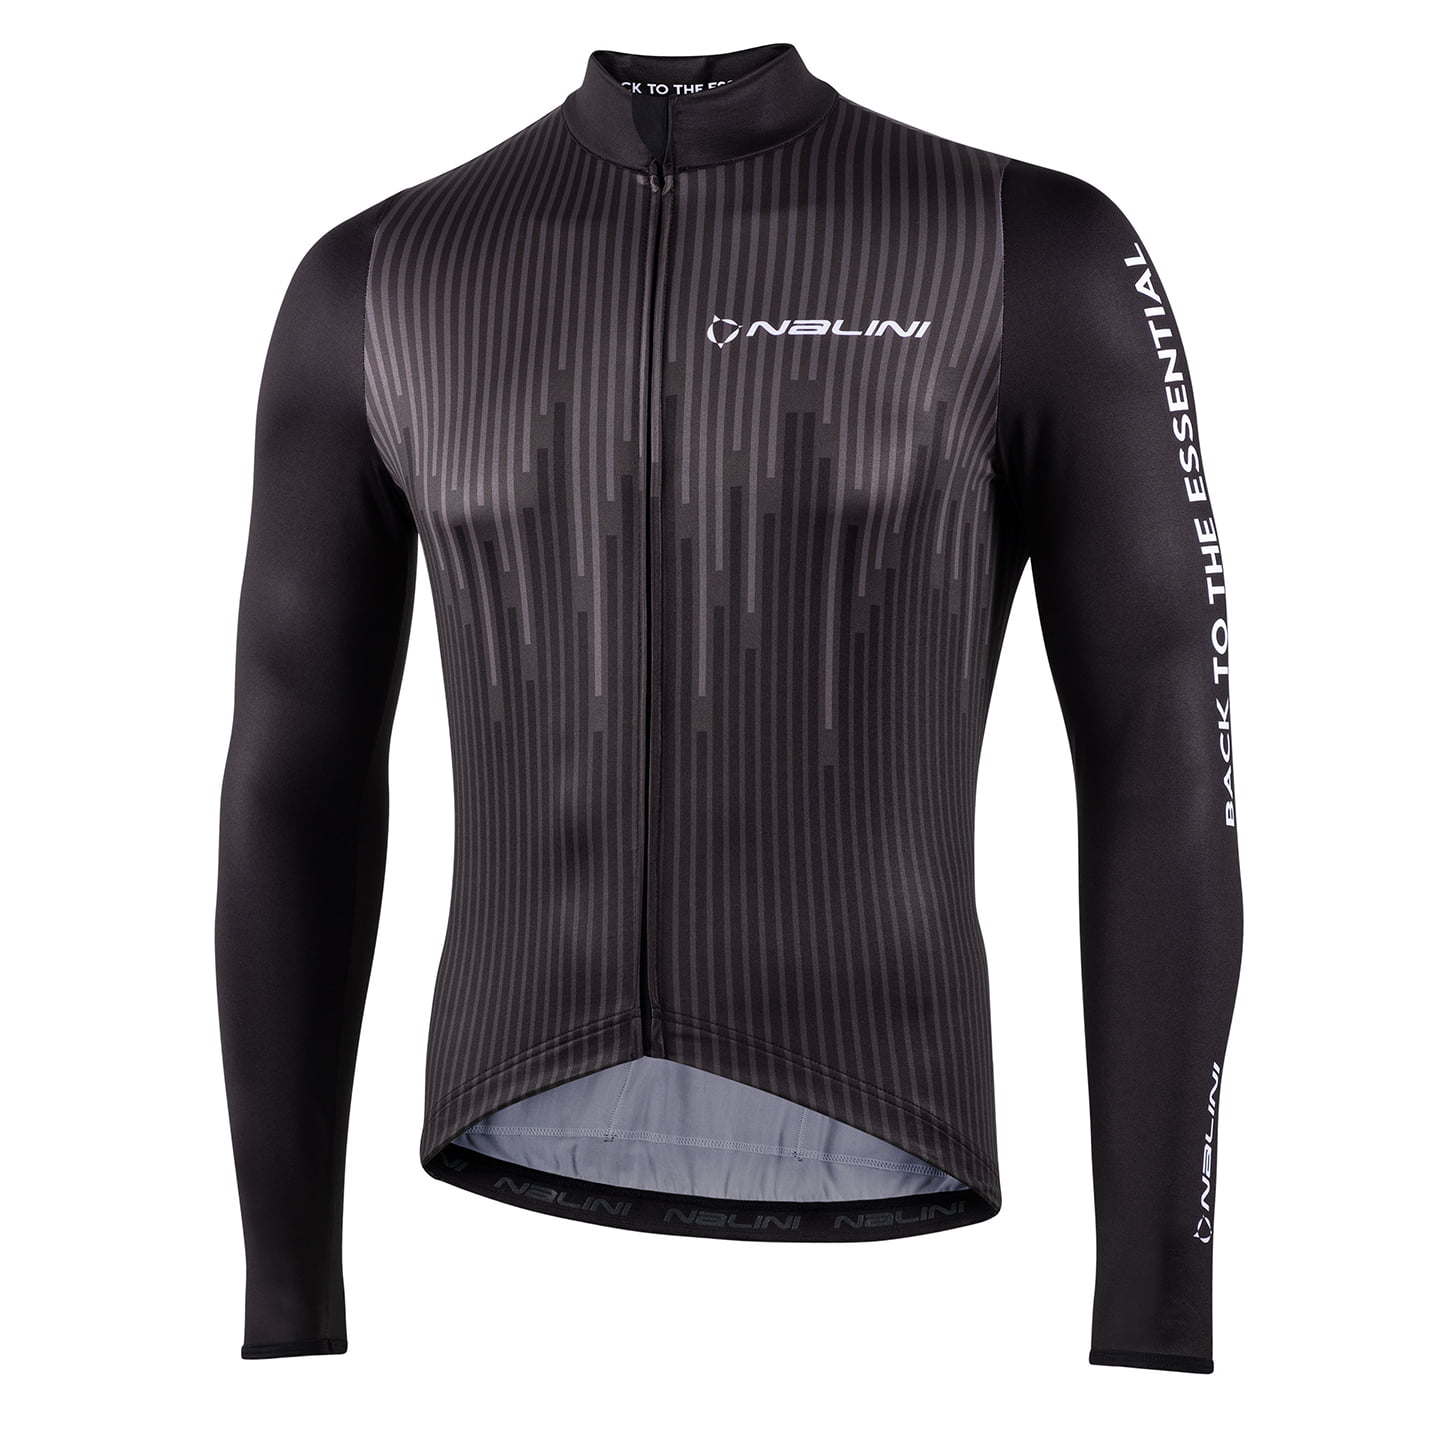 NALINI Fit Long Sleeve Jersey Long Sleeve Jersey, for men, size M, Cycling jersey, Cycling clothing